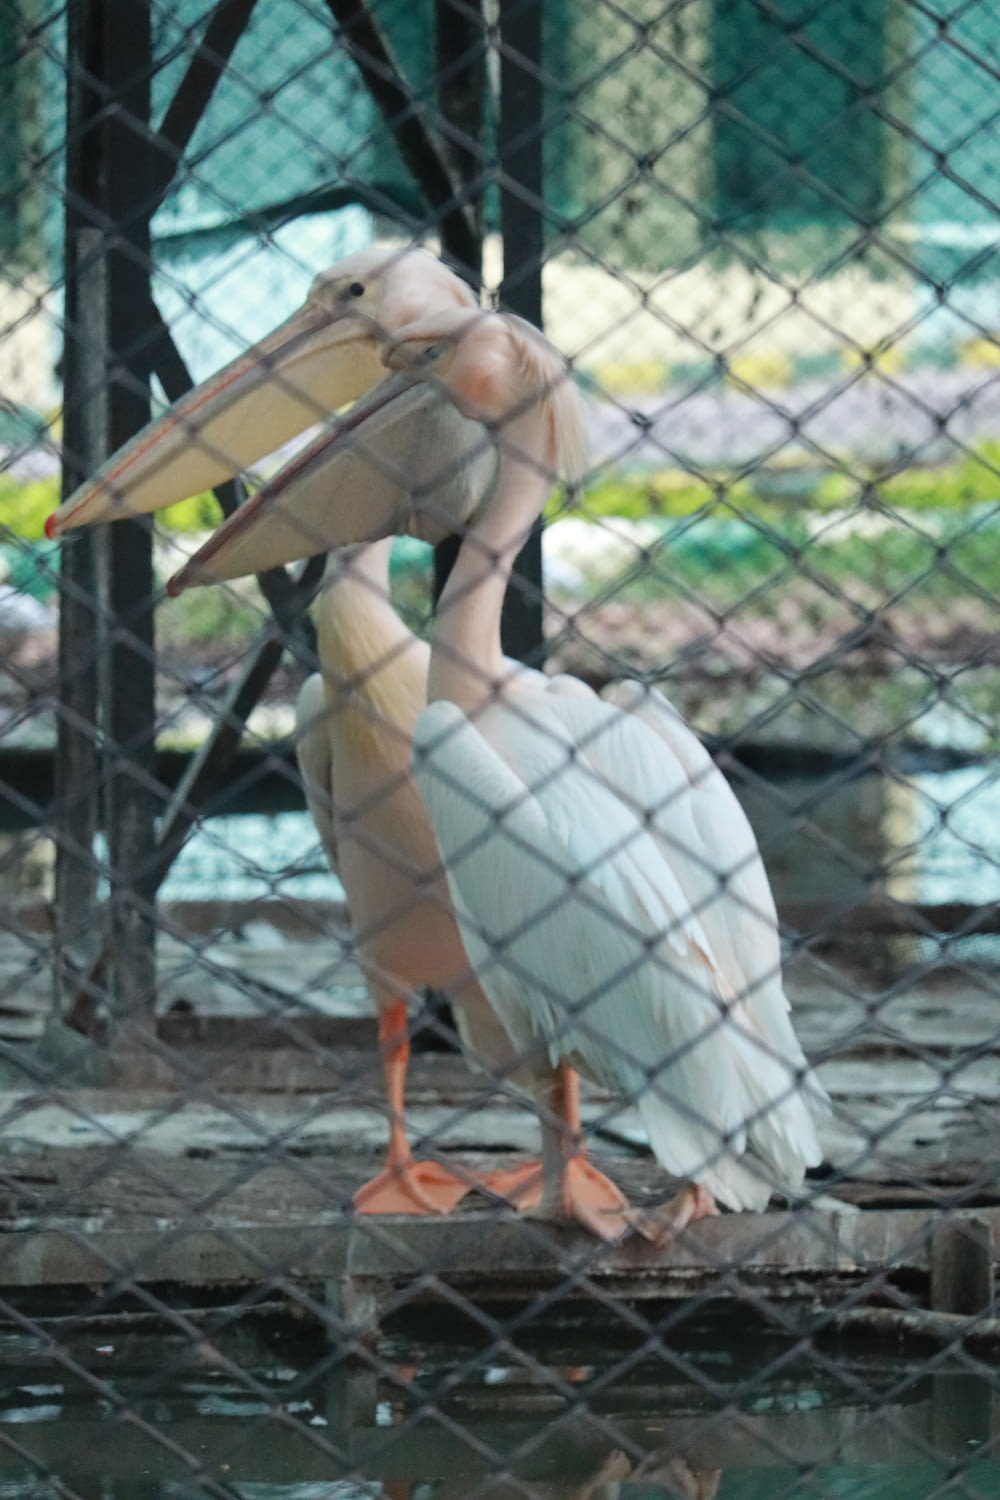 a pelican is standing in the water behind a chain link fence